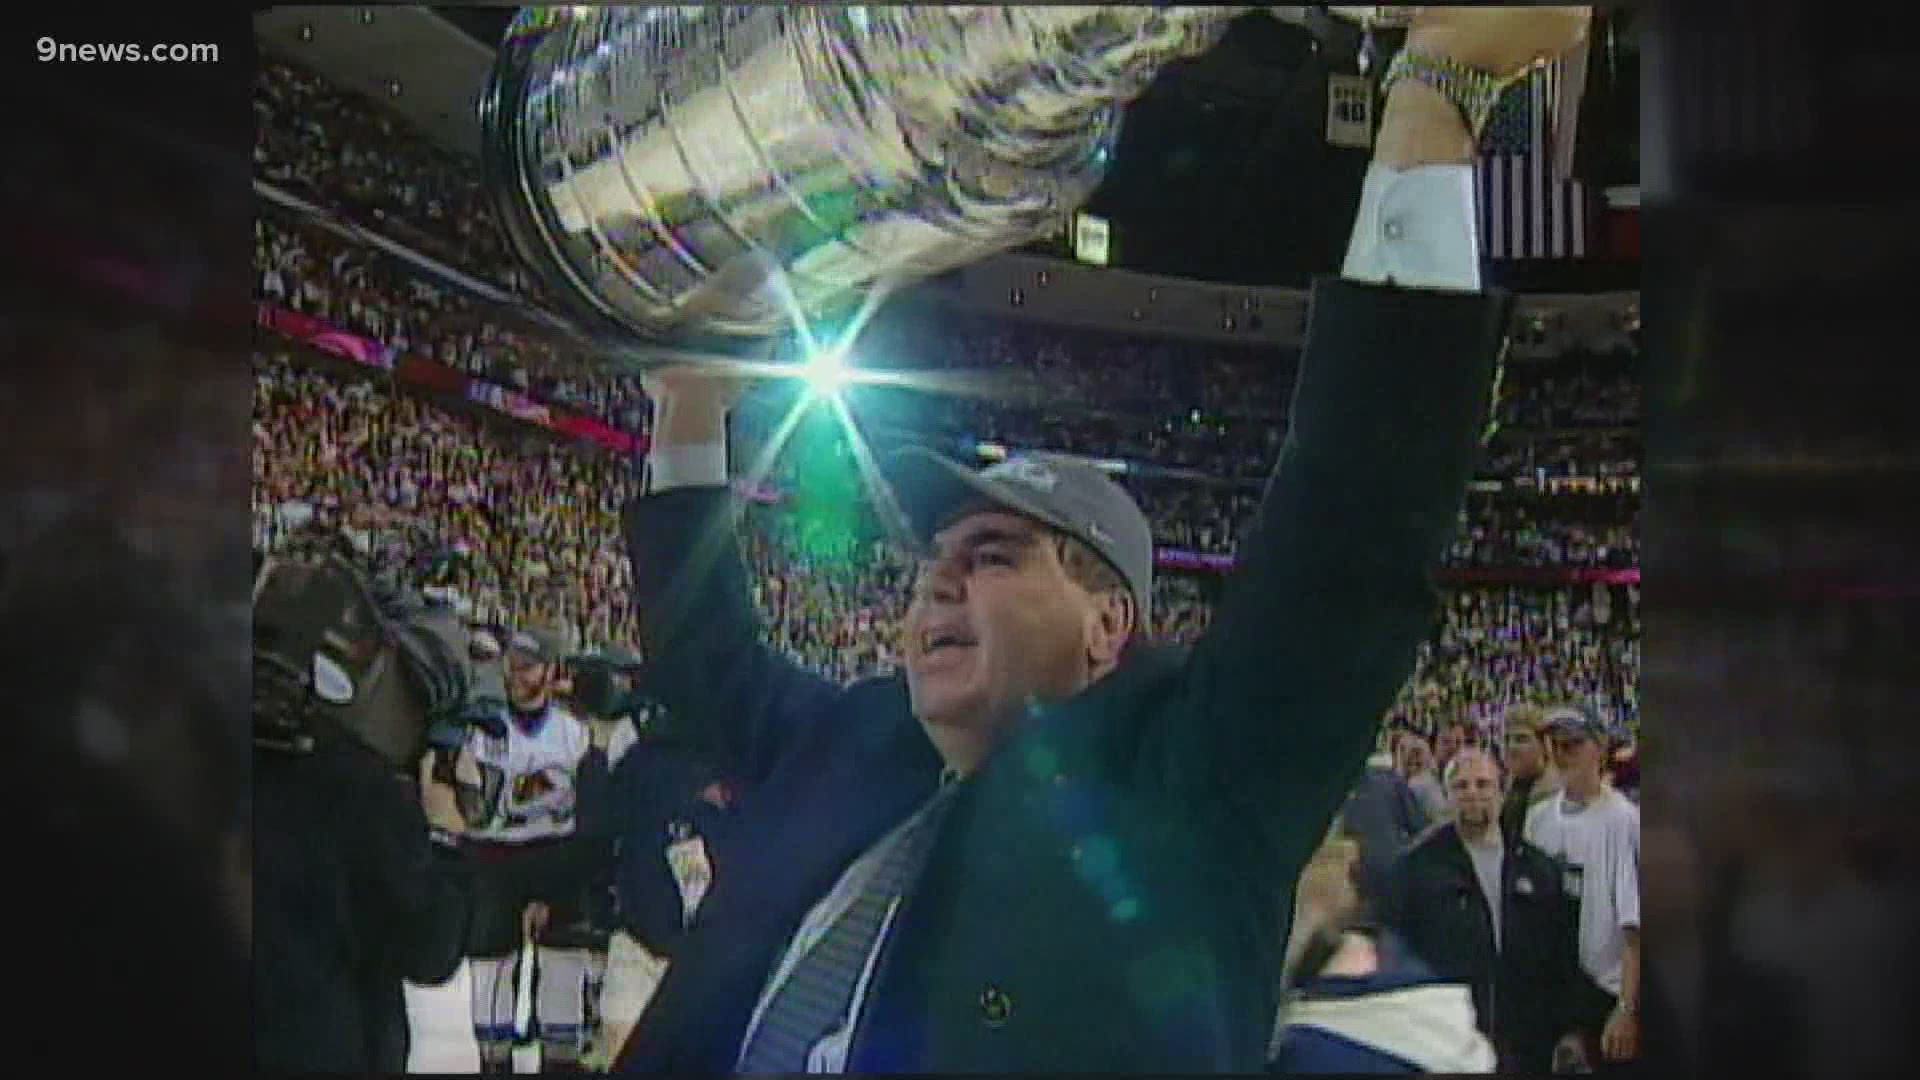 Lacroix took the Colorado Avalanche to Stanley Cup championships in 1996 and 2001.